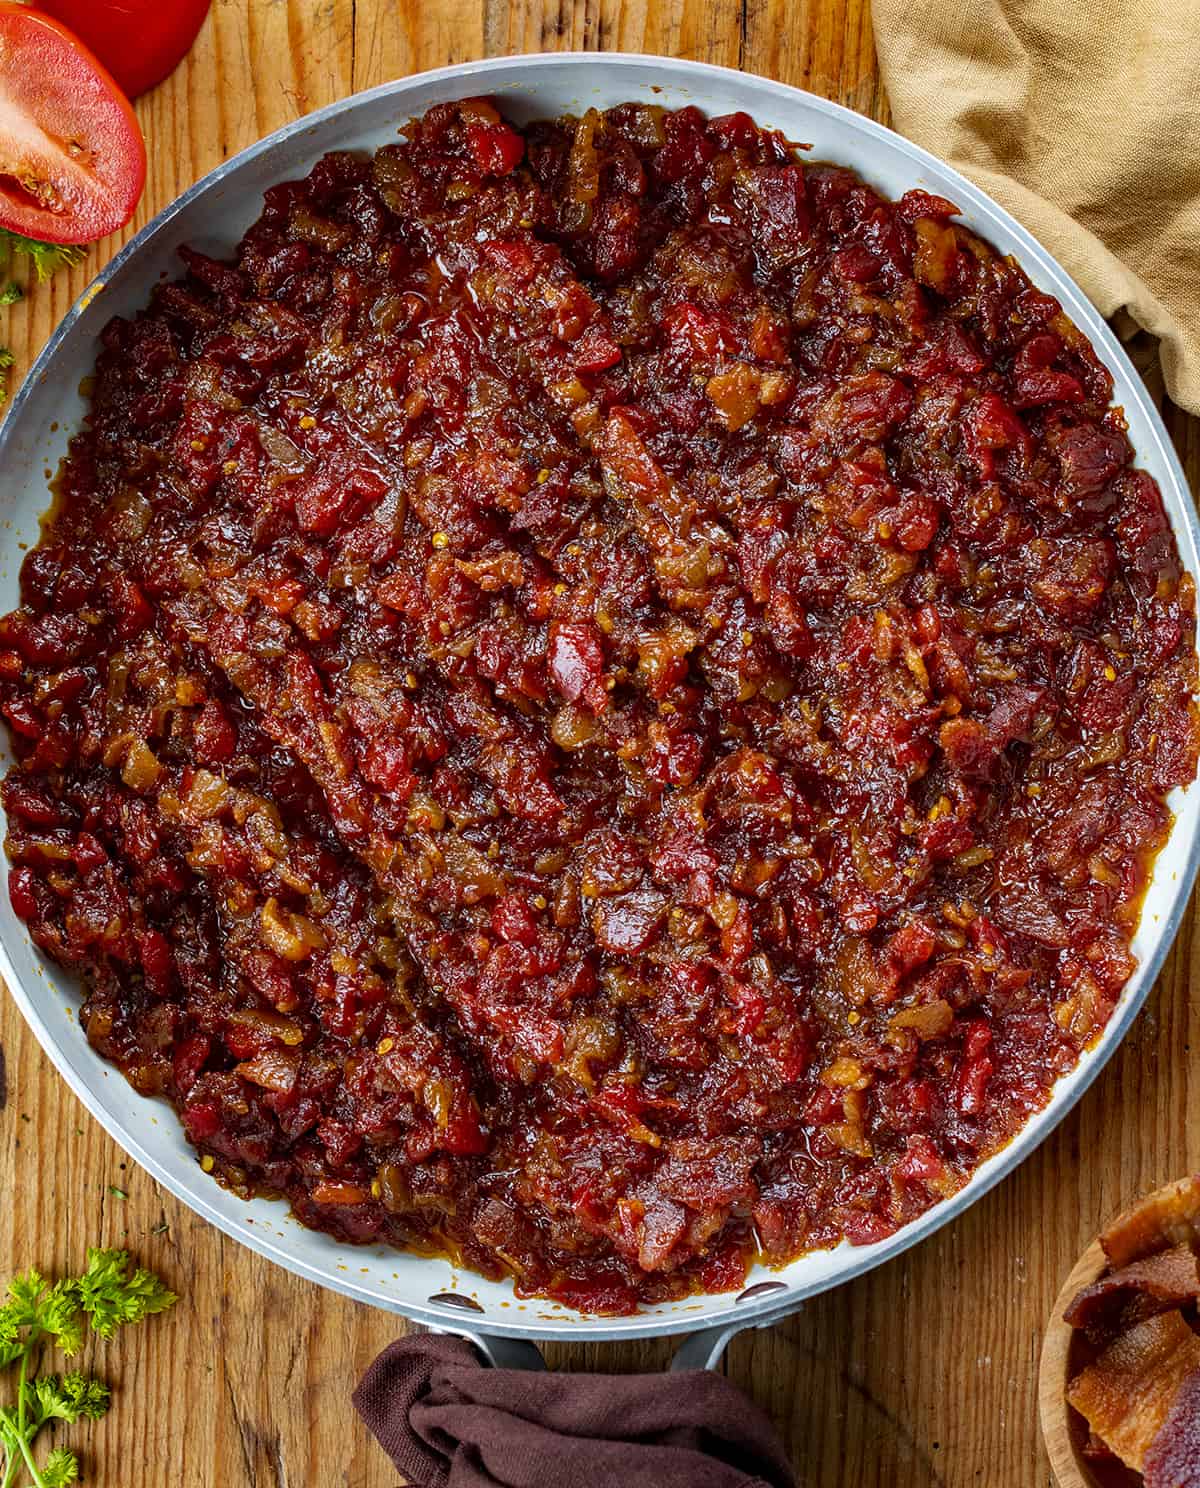 Skillet Filled with Cooked Tomato Bacon Jam. Jam, Bacon Jam, Tomato Bacon Jam, Bacon Marmalade, Bacon Jam Recipe, Appetizer, Super Bowl Appetizer, Game Day Food, Best Appetizers, Best Burger Toppings, i am homesteader, iamhomesteader